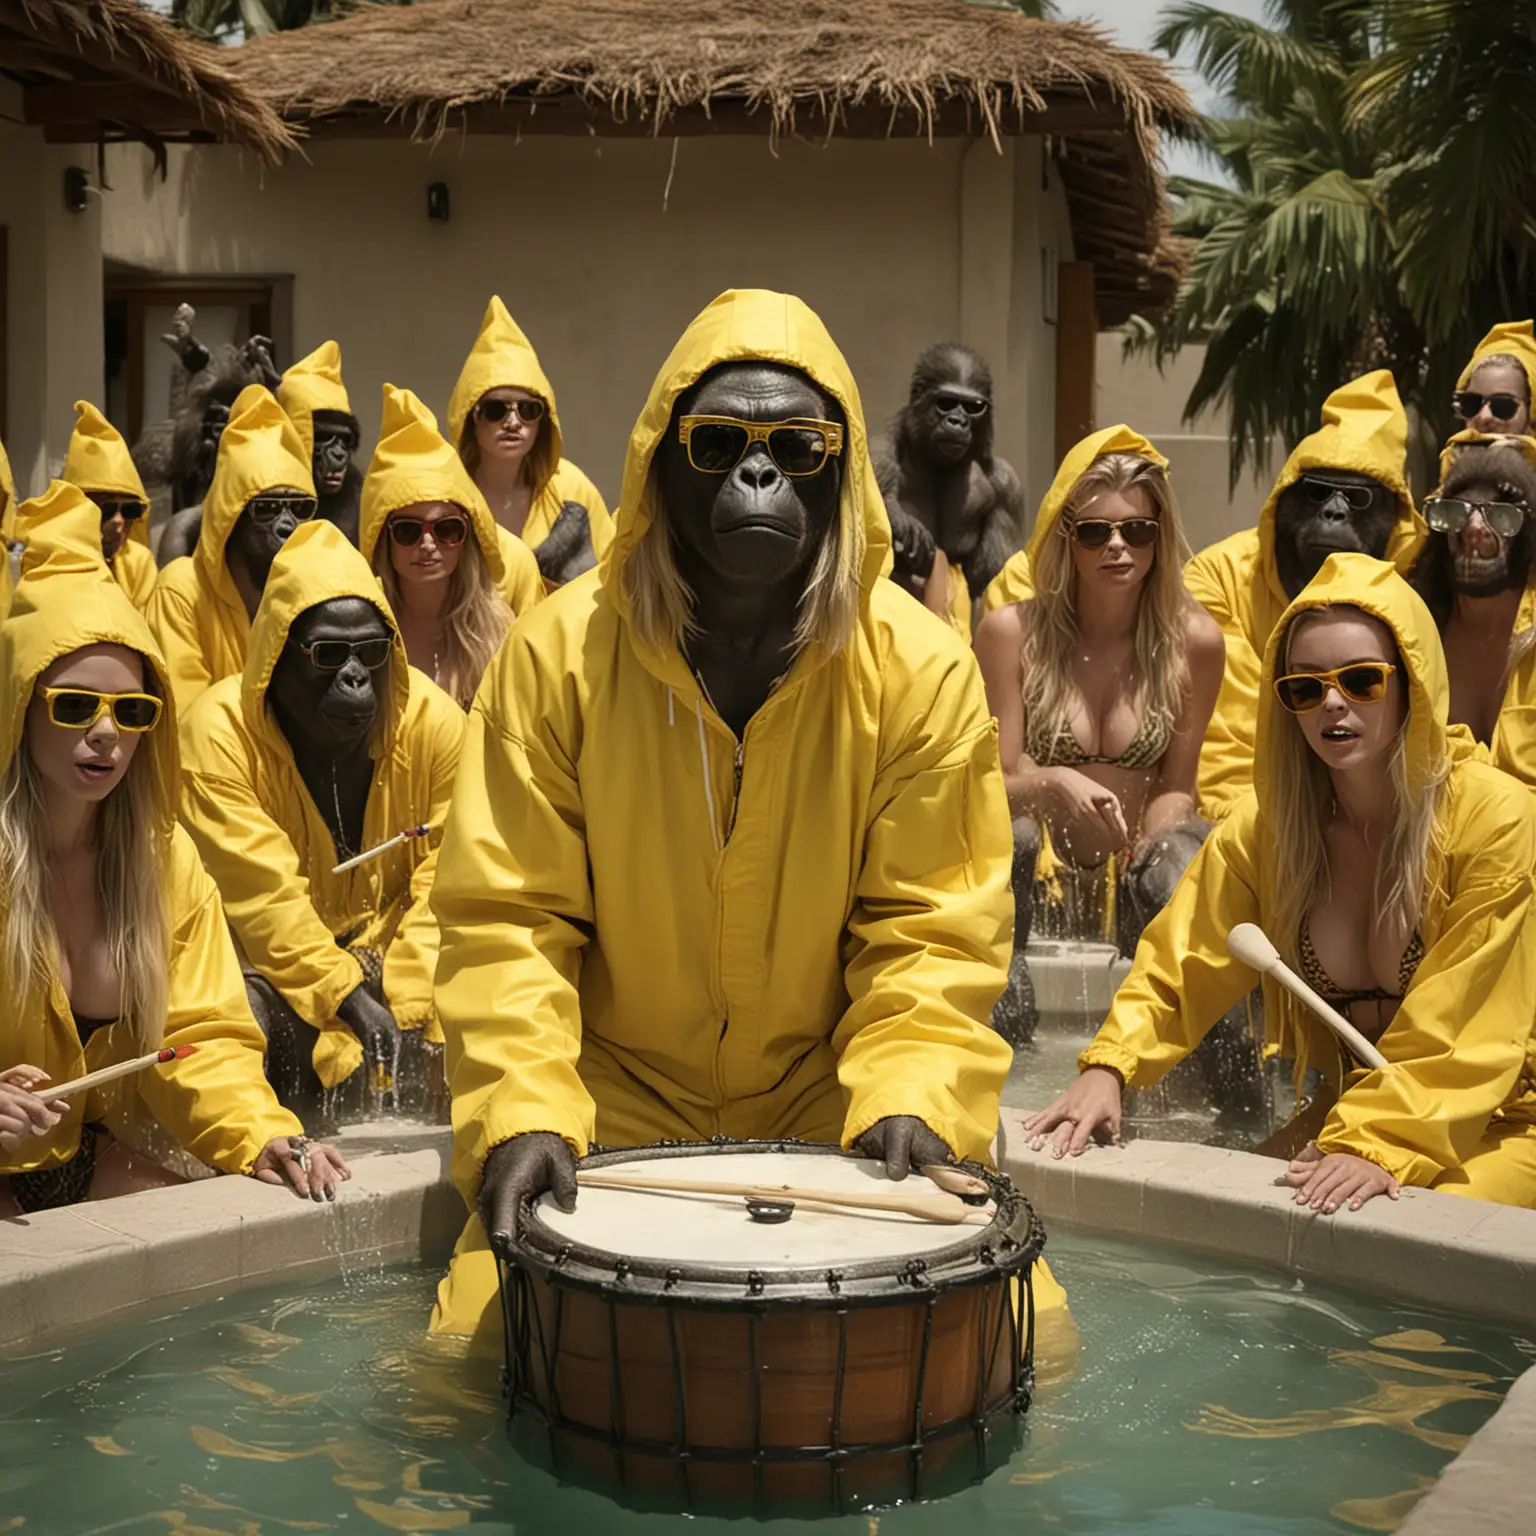 The gorilla is inside a huge jacuzzi surrounded by sexy blonde women in bikini. he is playing african percusion. The gorilla wears dark sunglasses and a YELLOW COLOR jumpsuit like the one in the Breaking Bad series. His head is covered by the yellow hood.
he is playing an african drum instrument. Close up. cinematic. FACING THE CAMERA. 